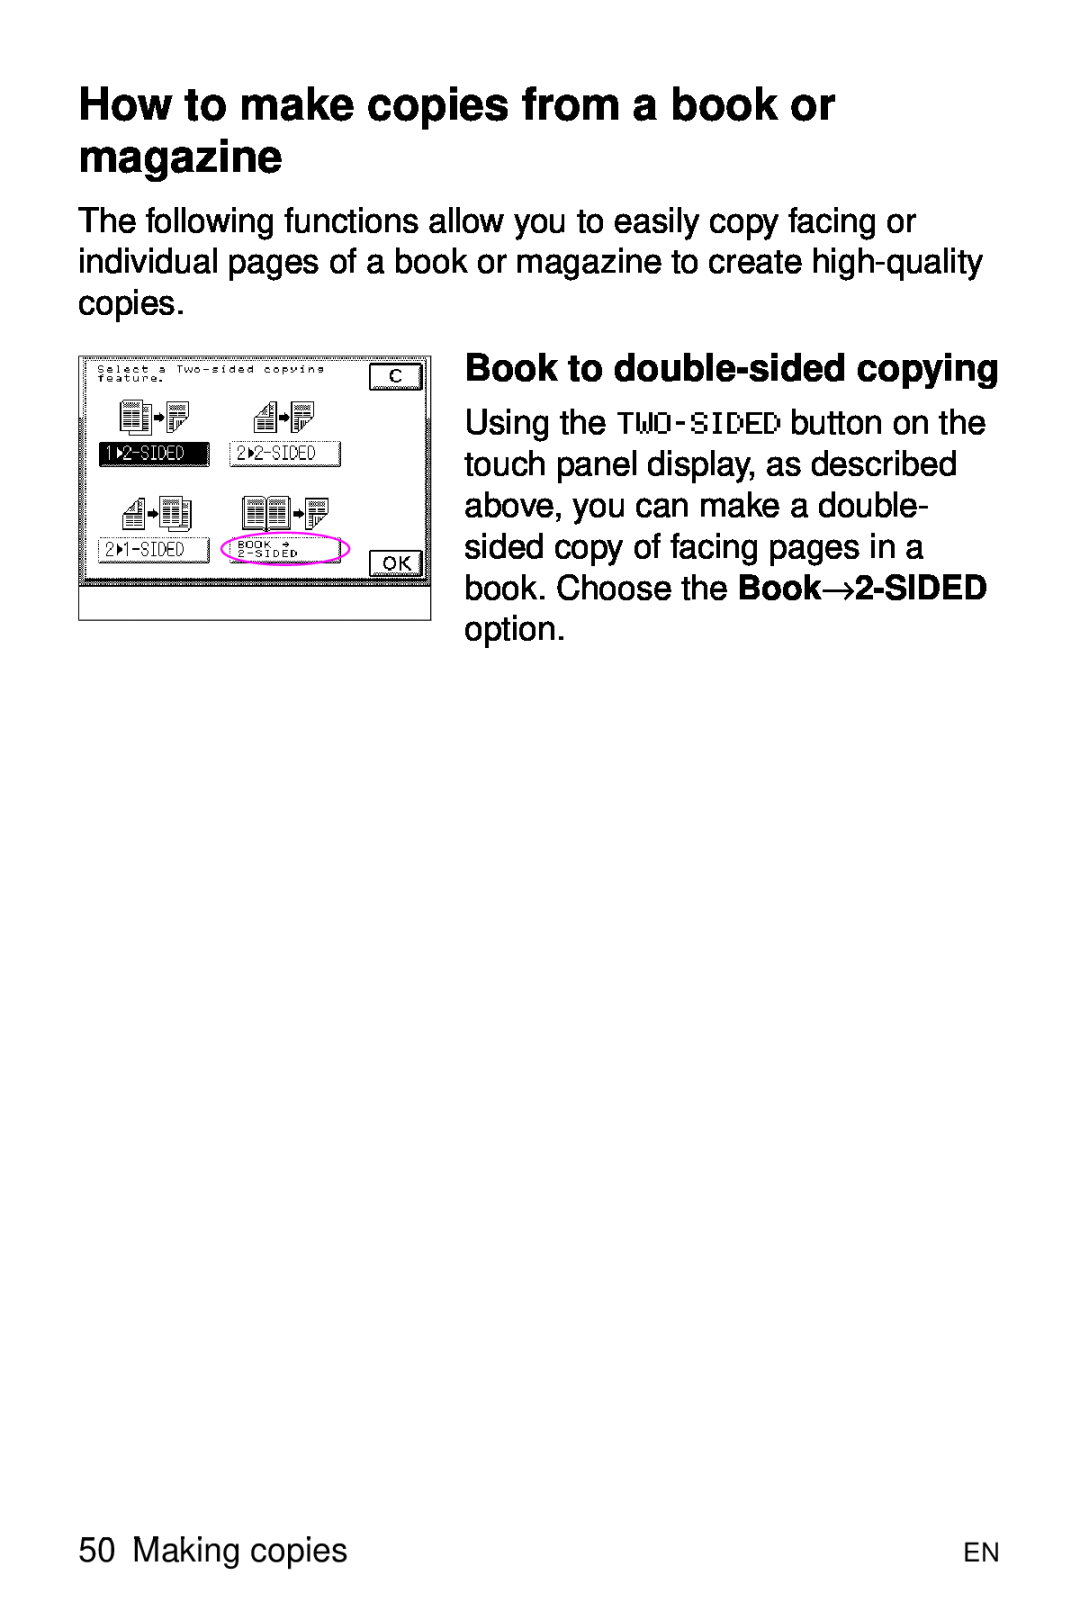 HP 8000 s manual How to make copies from a book or magazine, Book to double-sided copying 